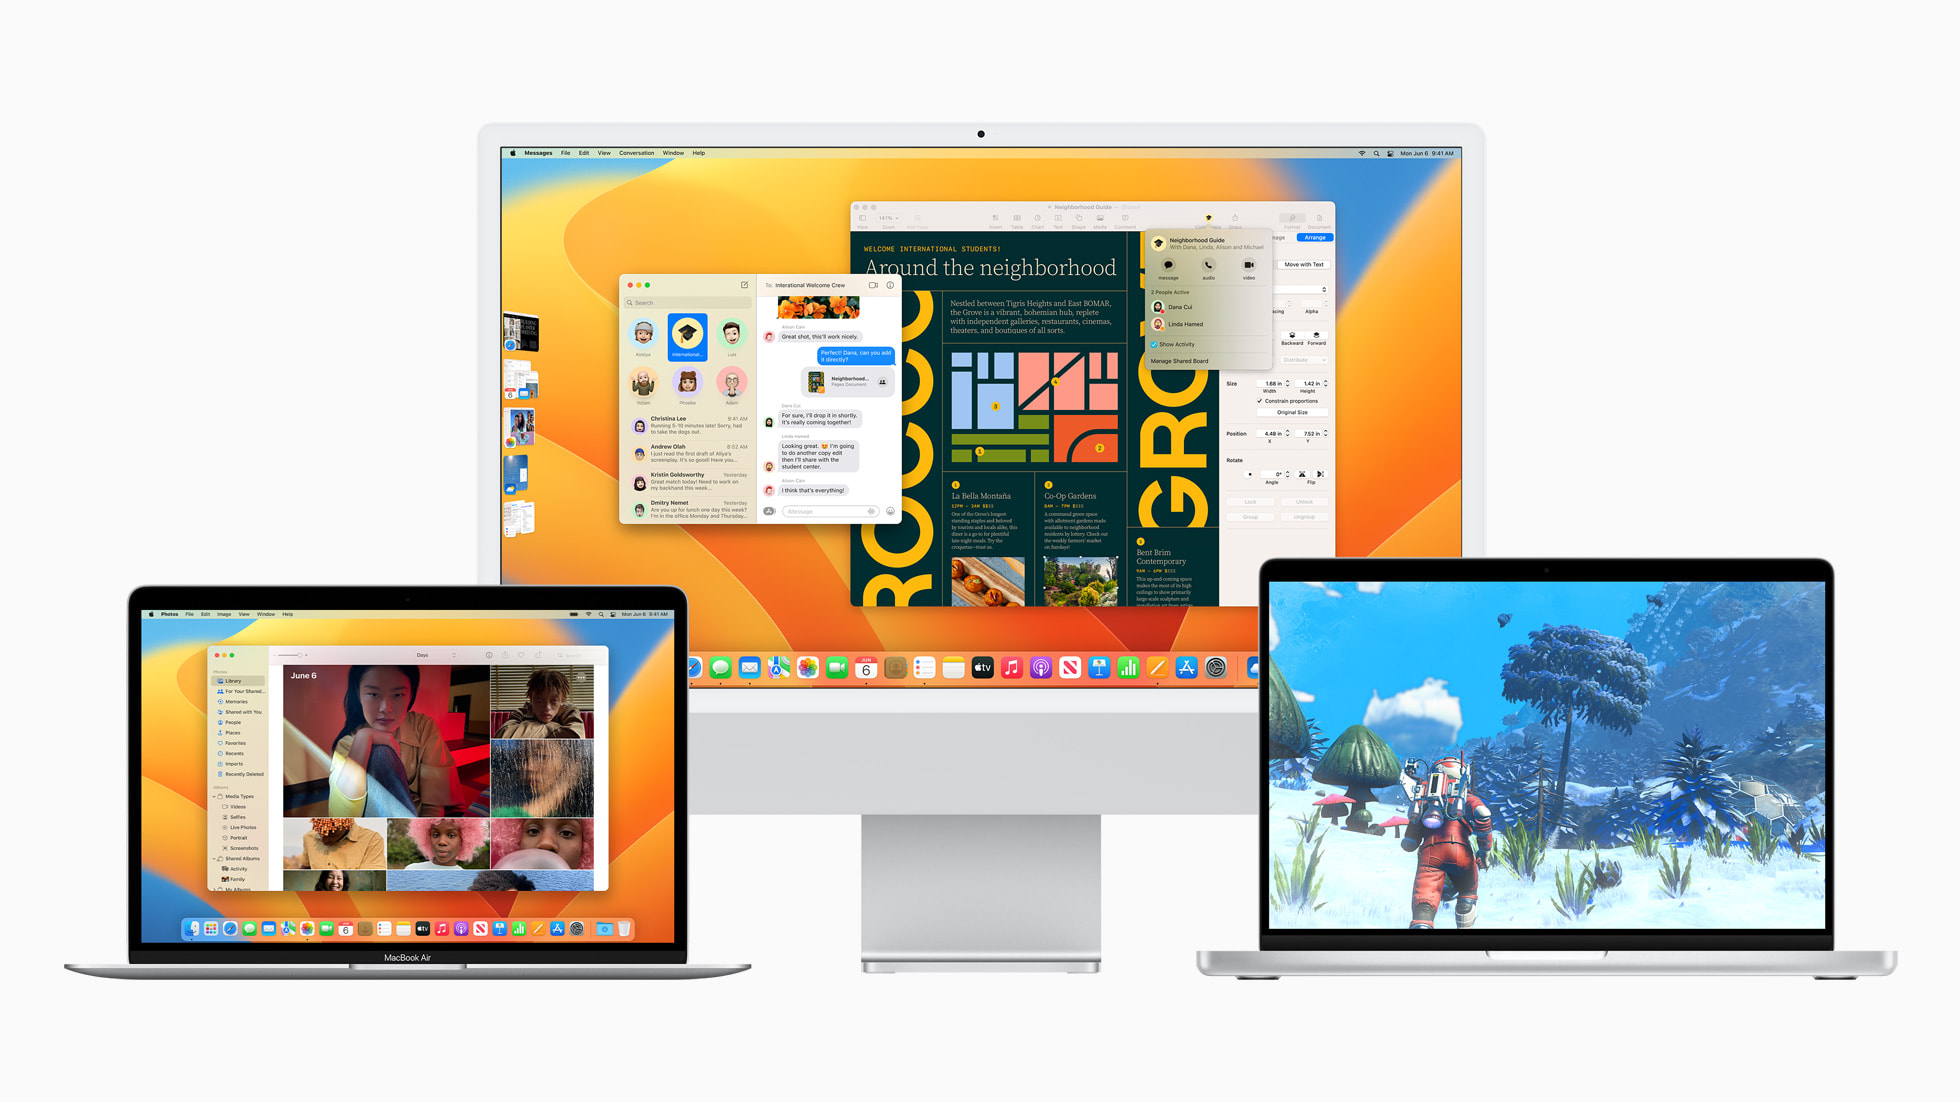 Following iOS 16: Apple introduced macOS Ventura with a new multitasking mode and updated applications